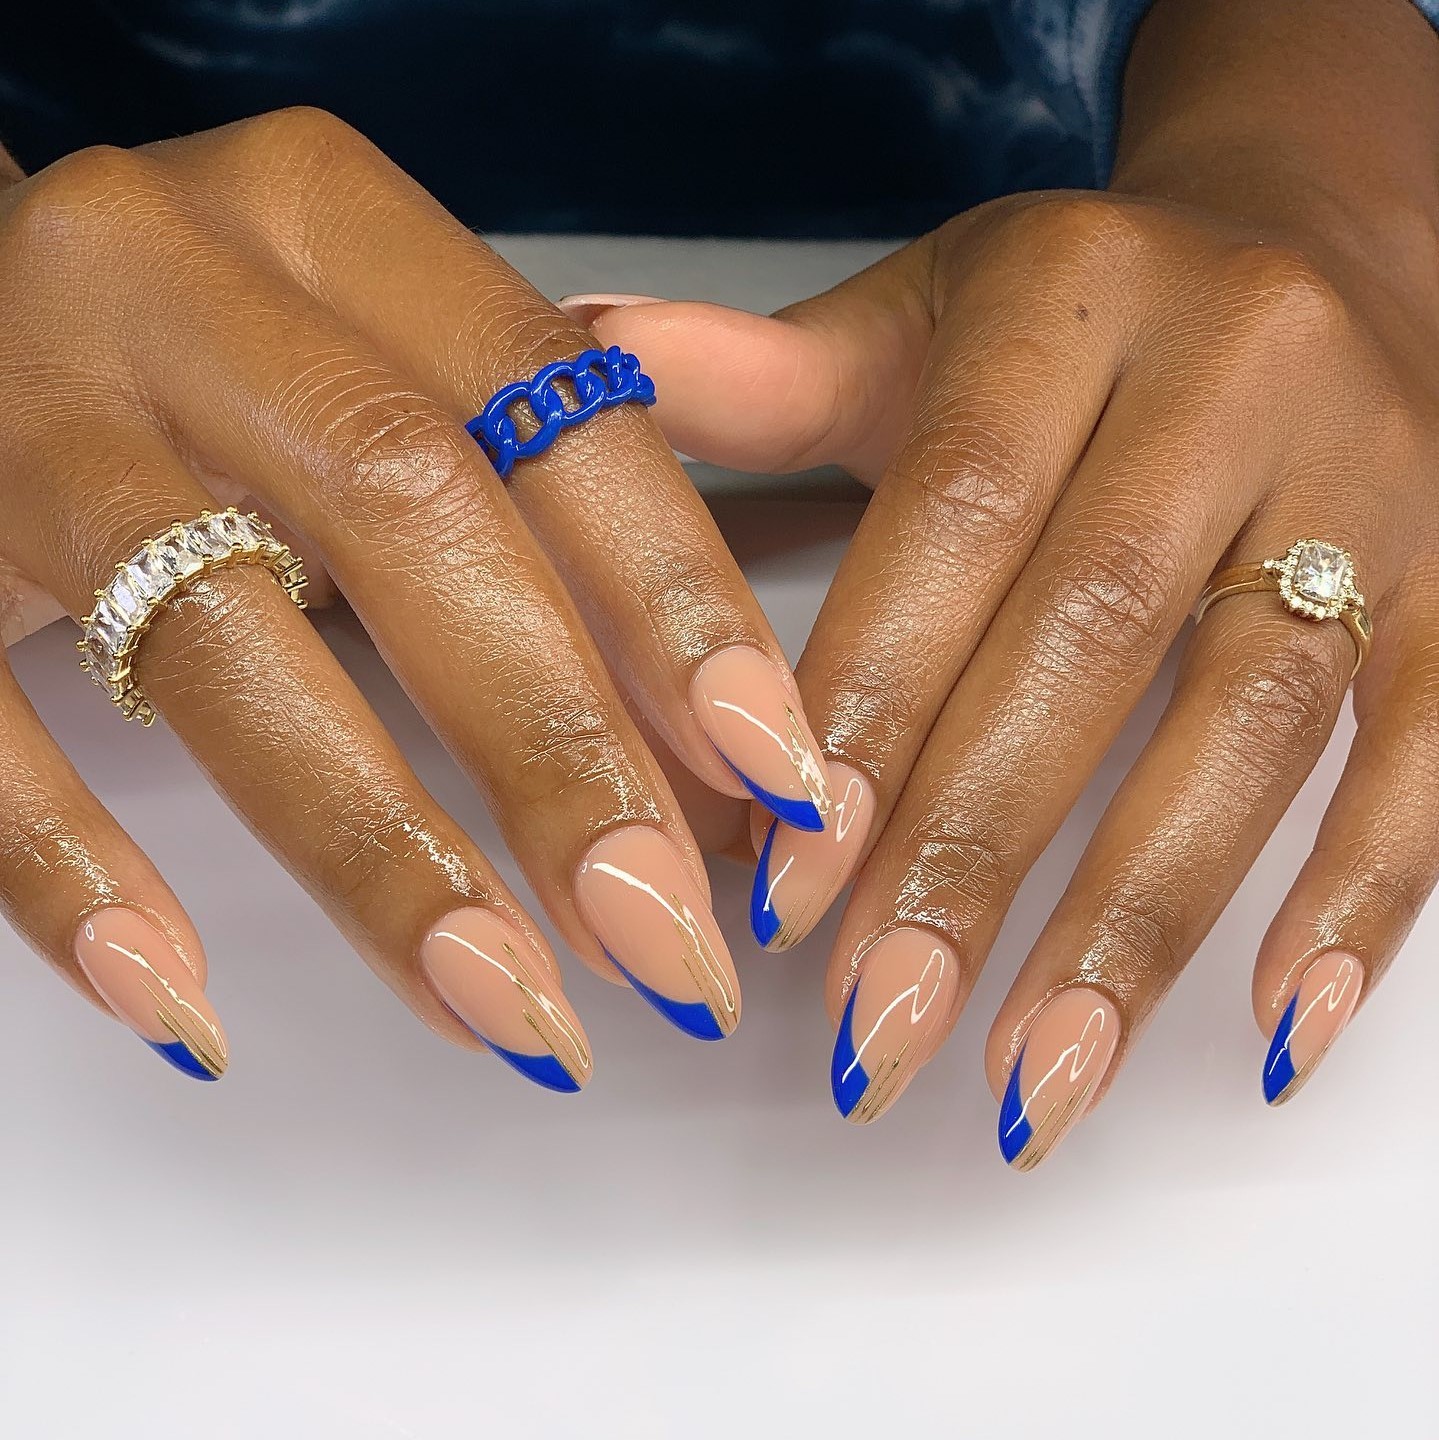 21 Blue Nail Designs To Try - Beauty Bay Edited